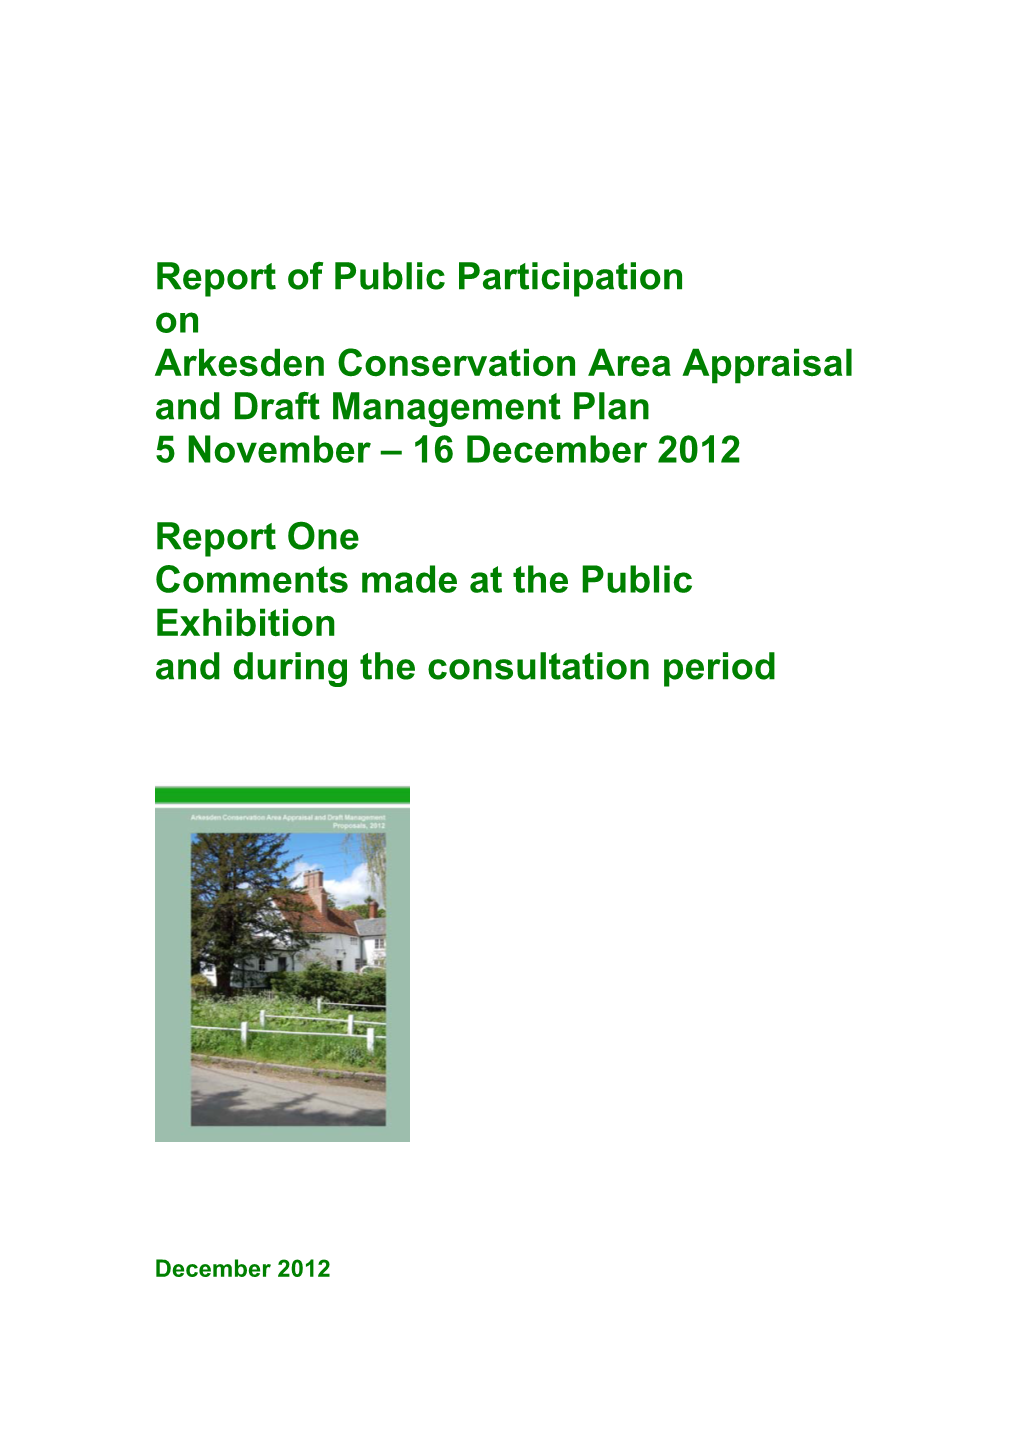 Report of Public Participation on Arkesden Conservation Area Appraisal and Draft Management Plan 5 November – 16 December 2012